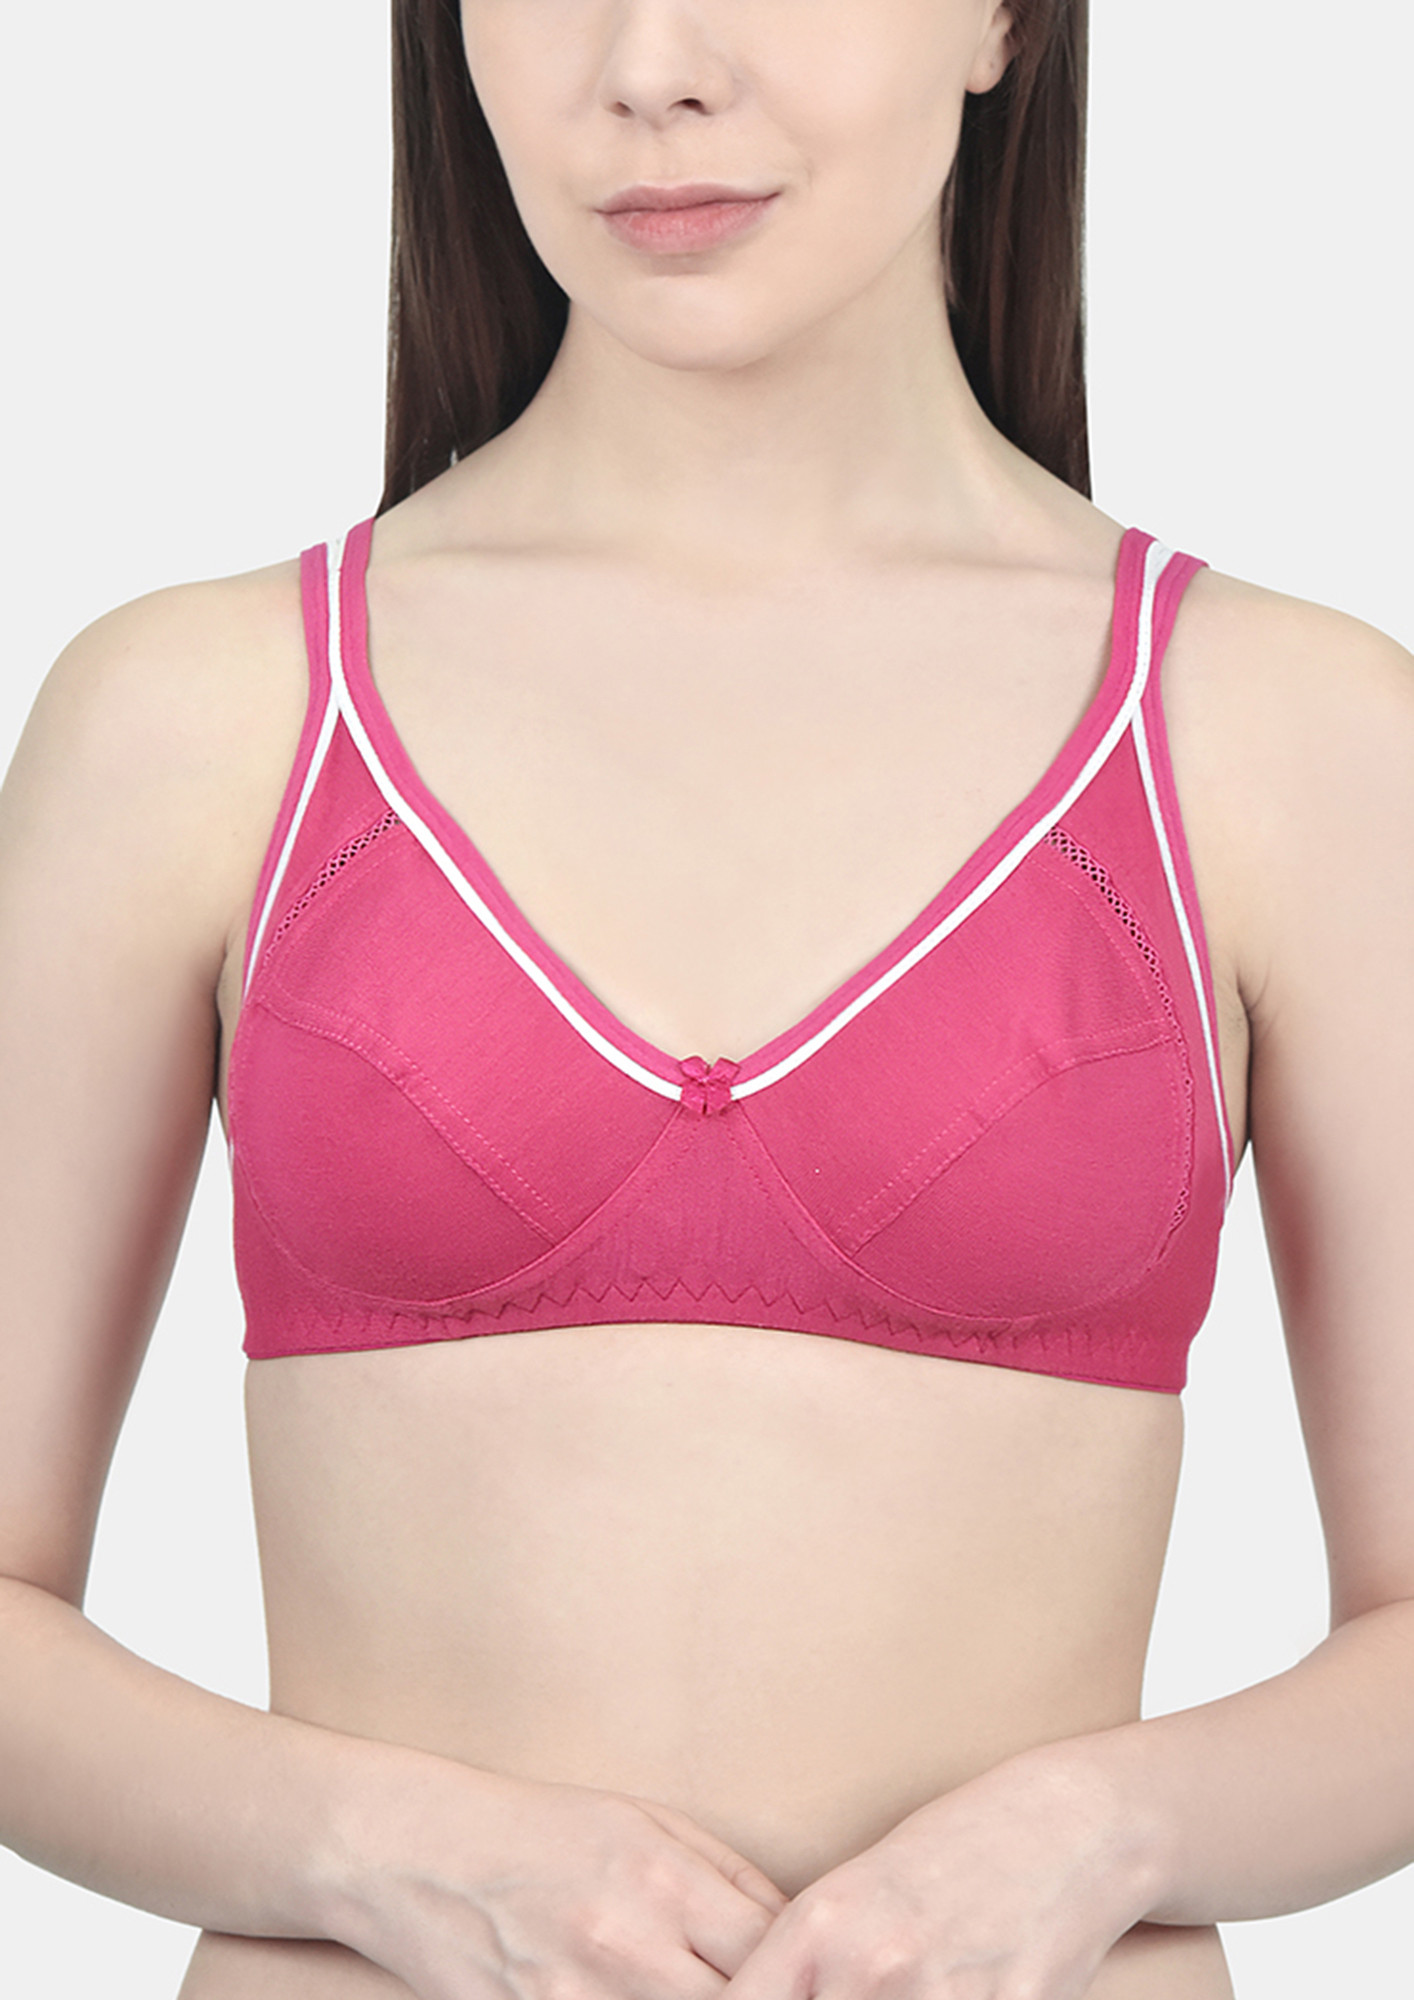 ABSTRACT TOUCH FUSCHIA NON WIRED NON PADDED BRA